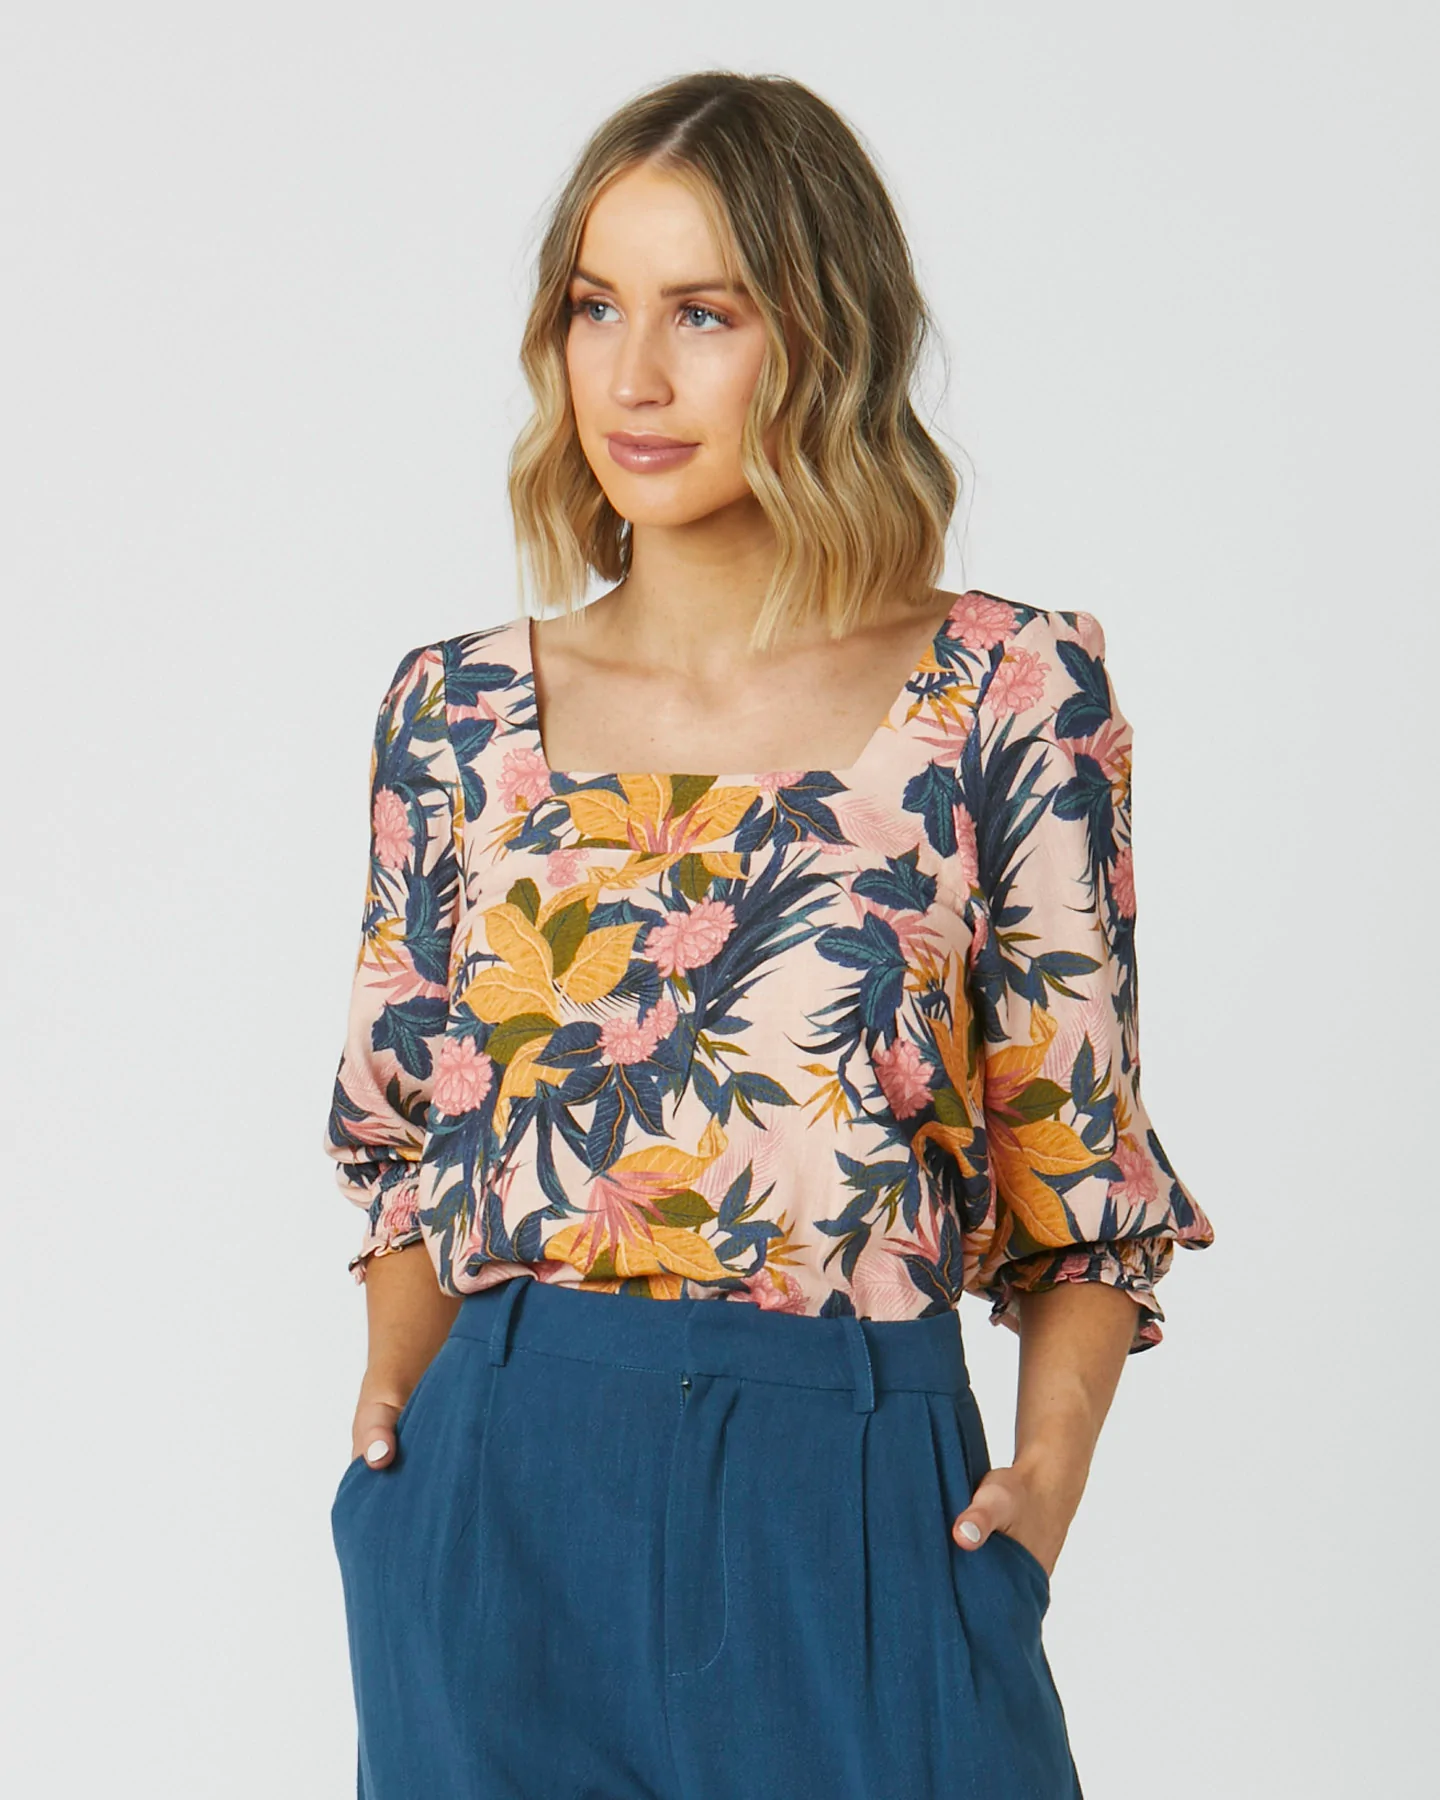 Buy Sass Clothing - Alexis Top - Tropical Buy Gift, Clothing, Footwear ...